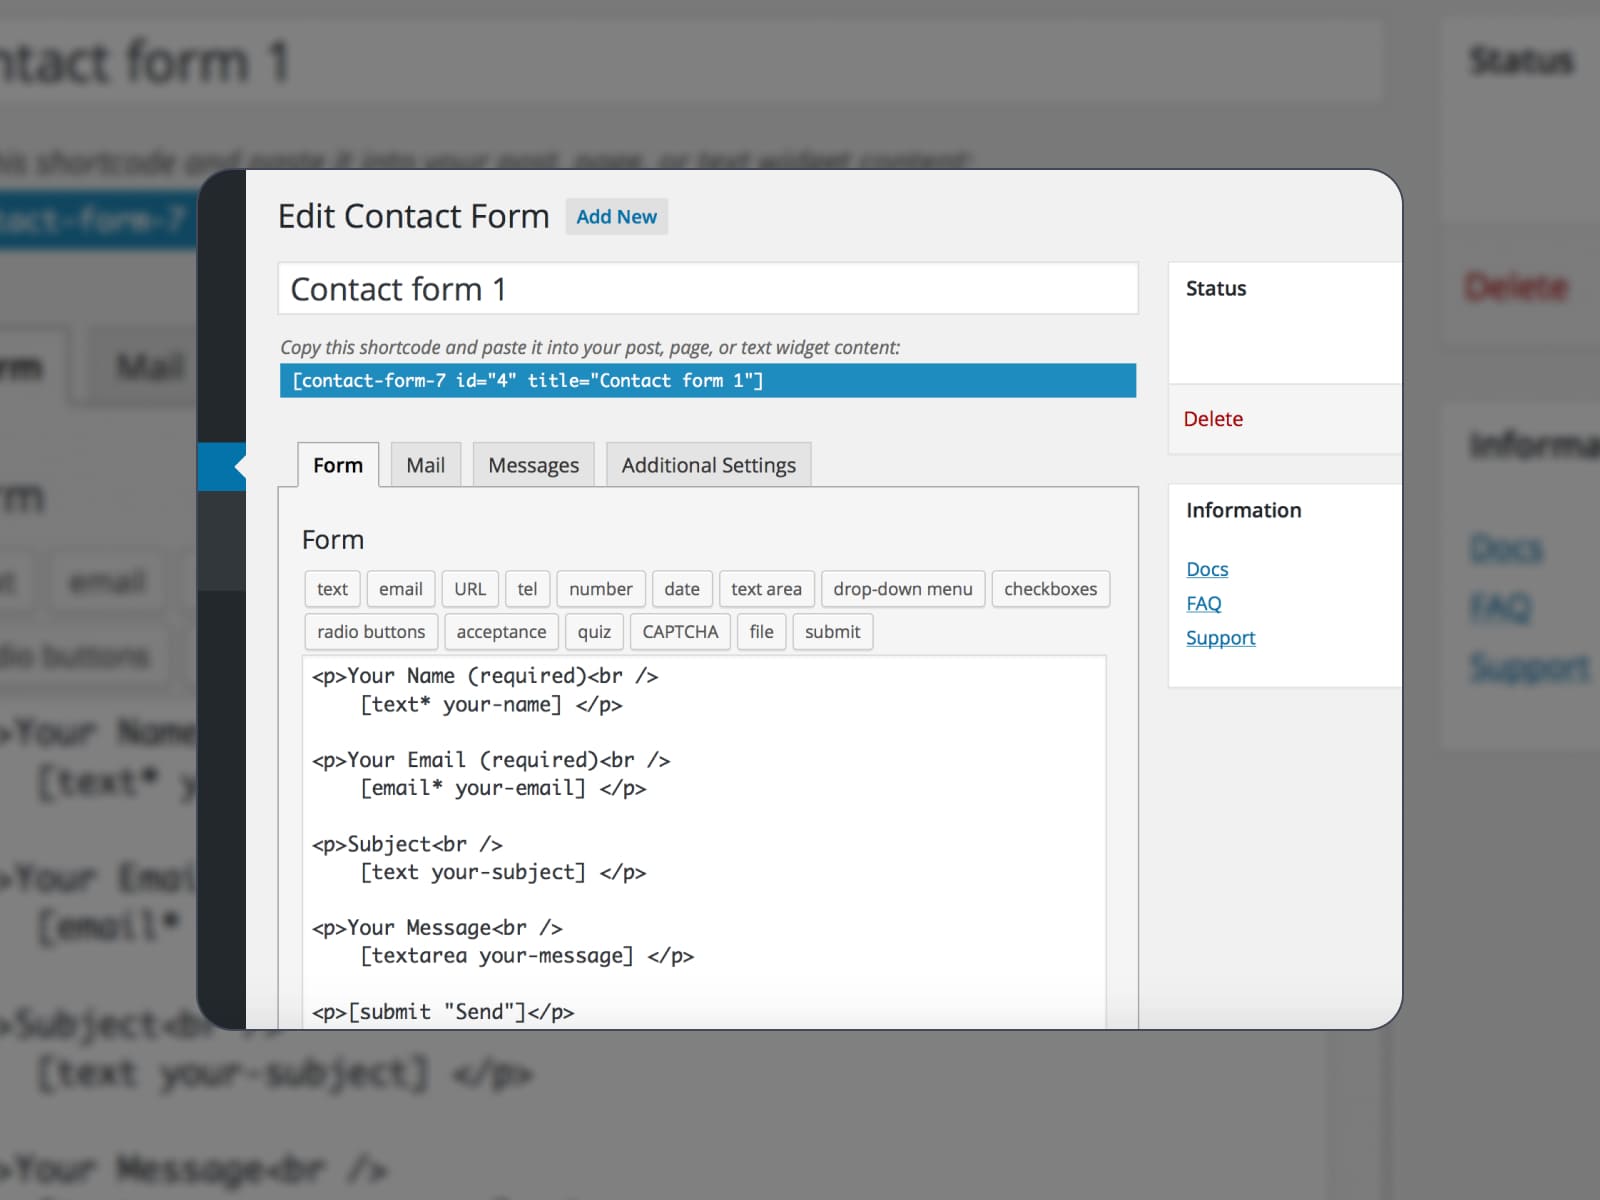 Image of the Contact Form 7 WordPress admin dashboard.